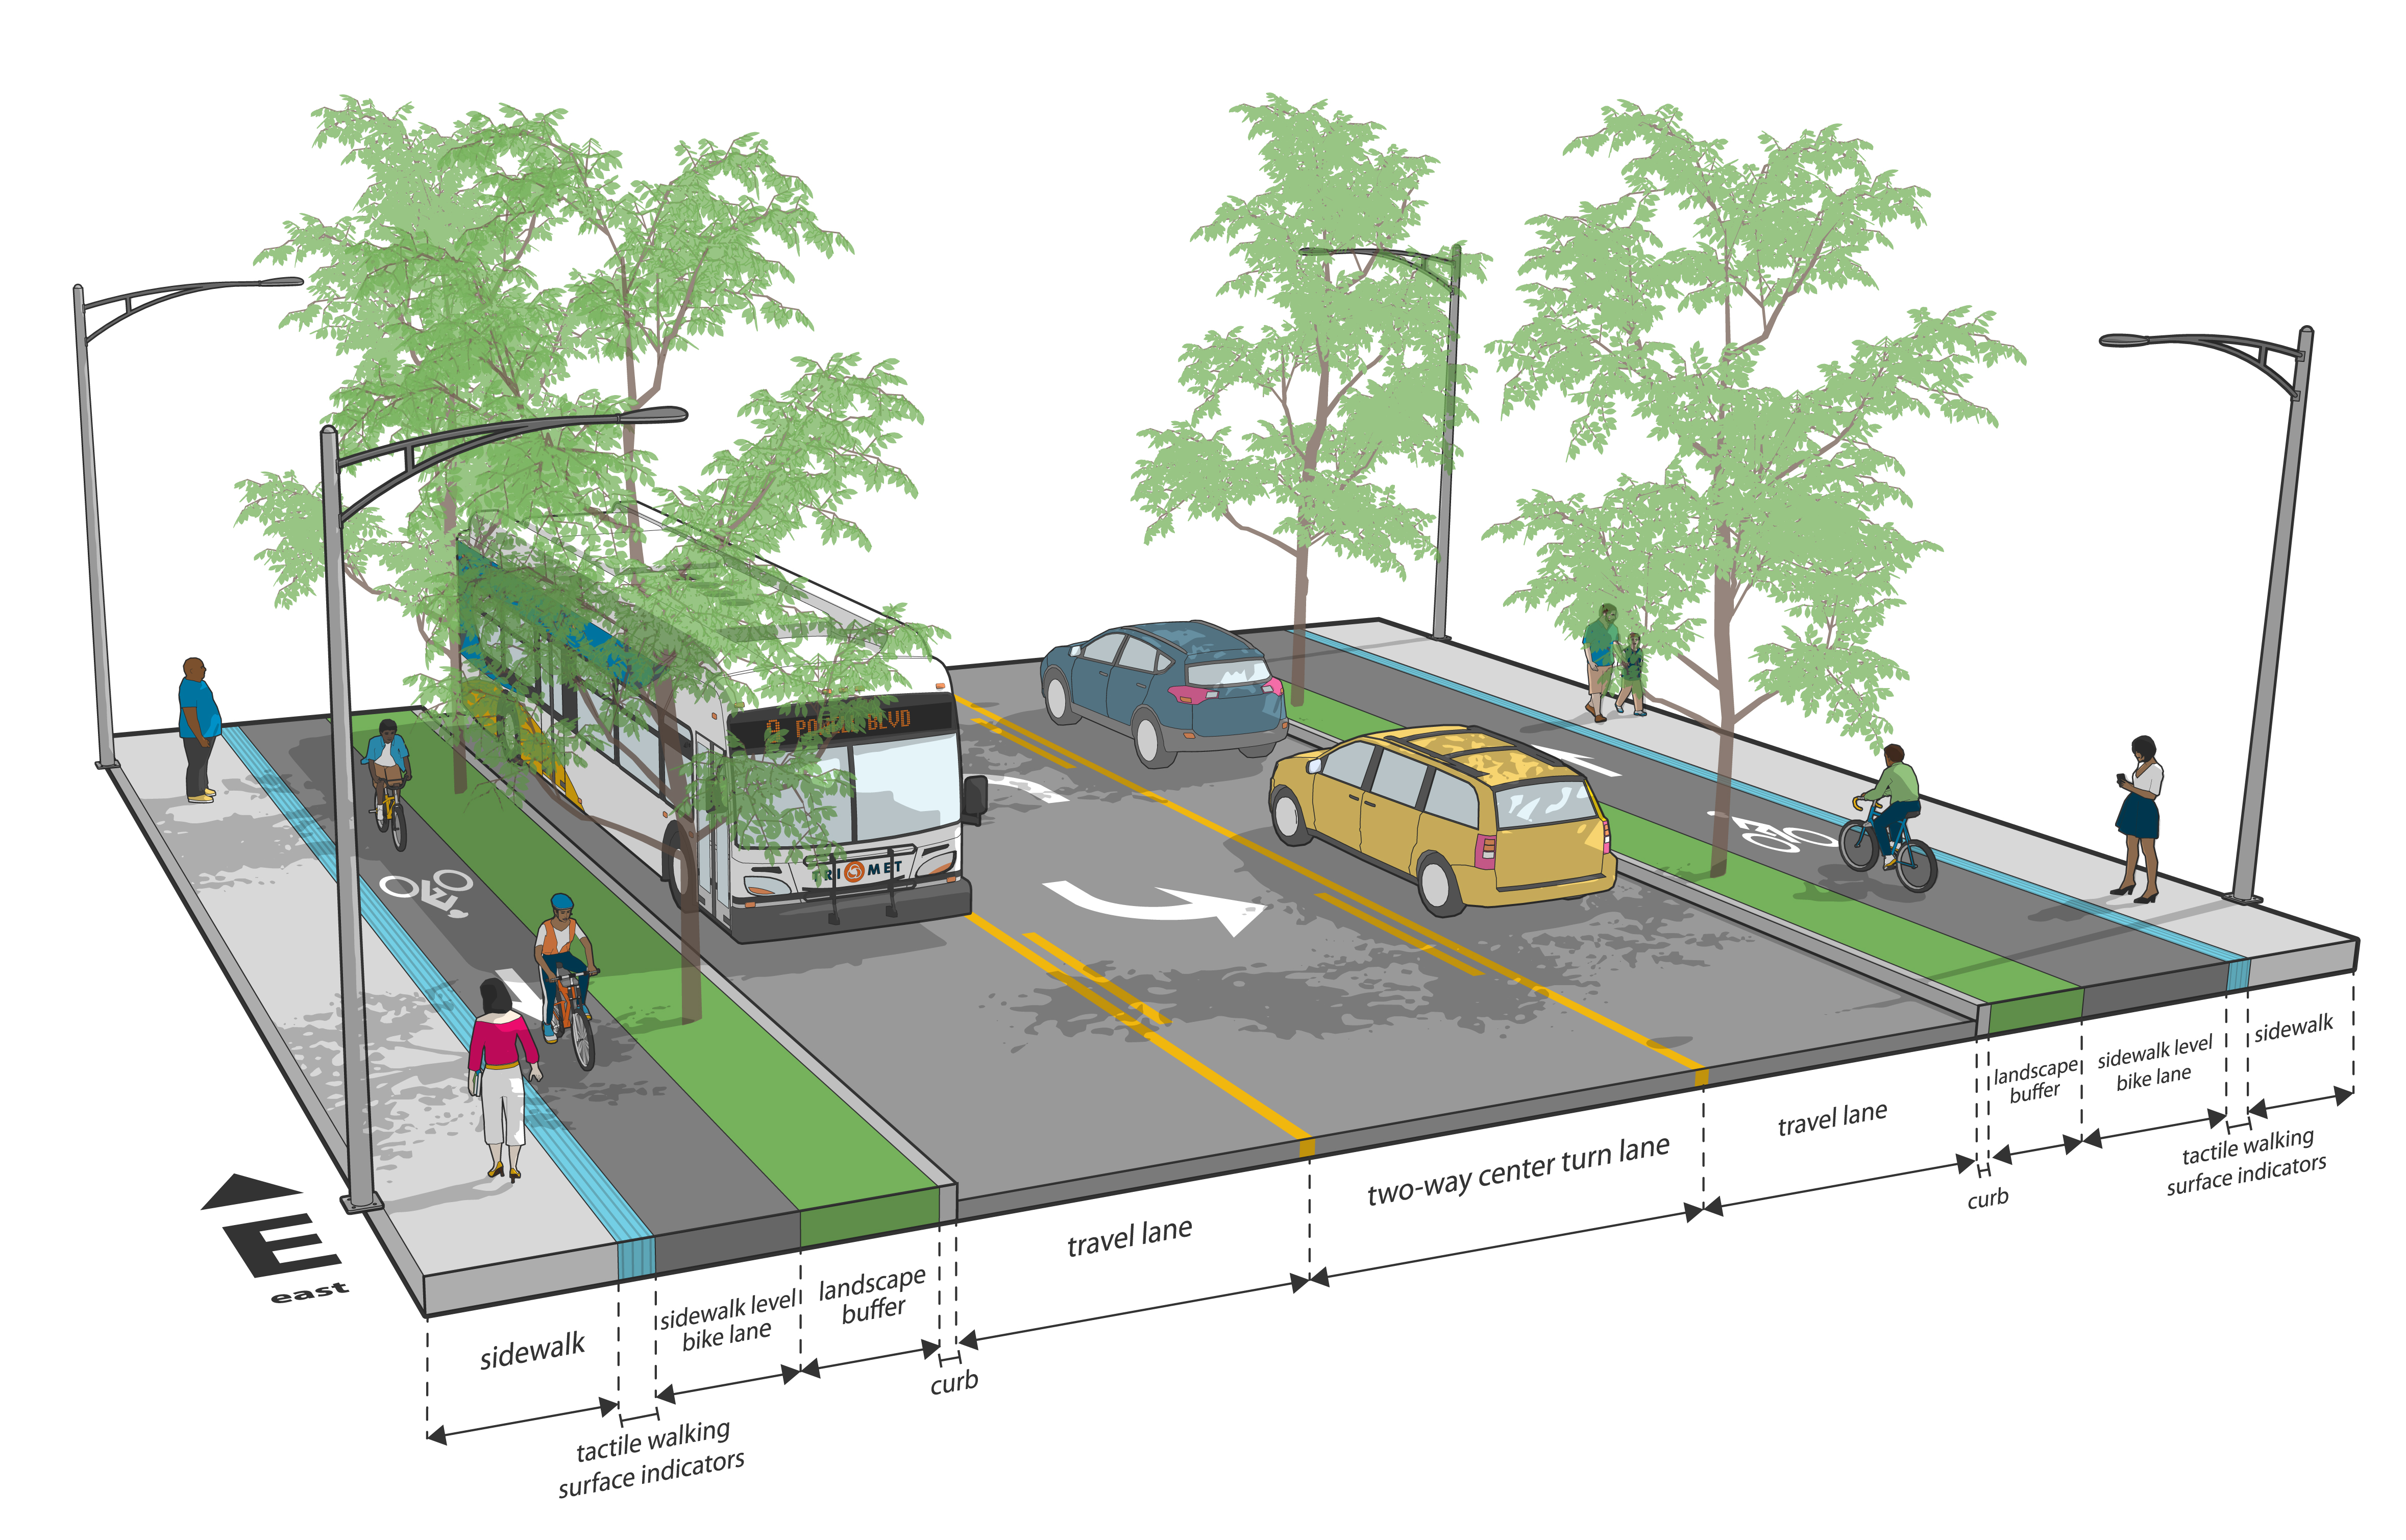 Example image of how Outer Southeast Powell Boulevard will look afer construction.